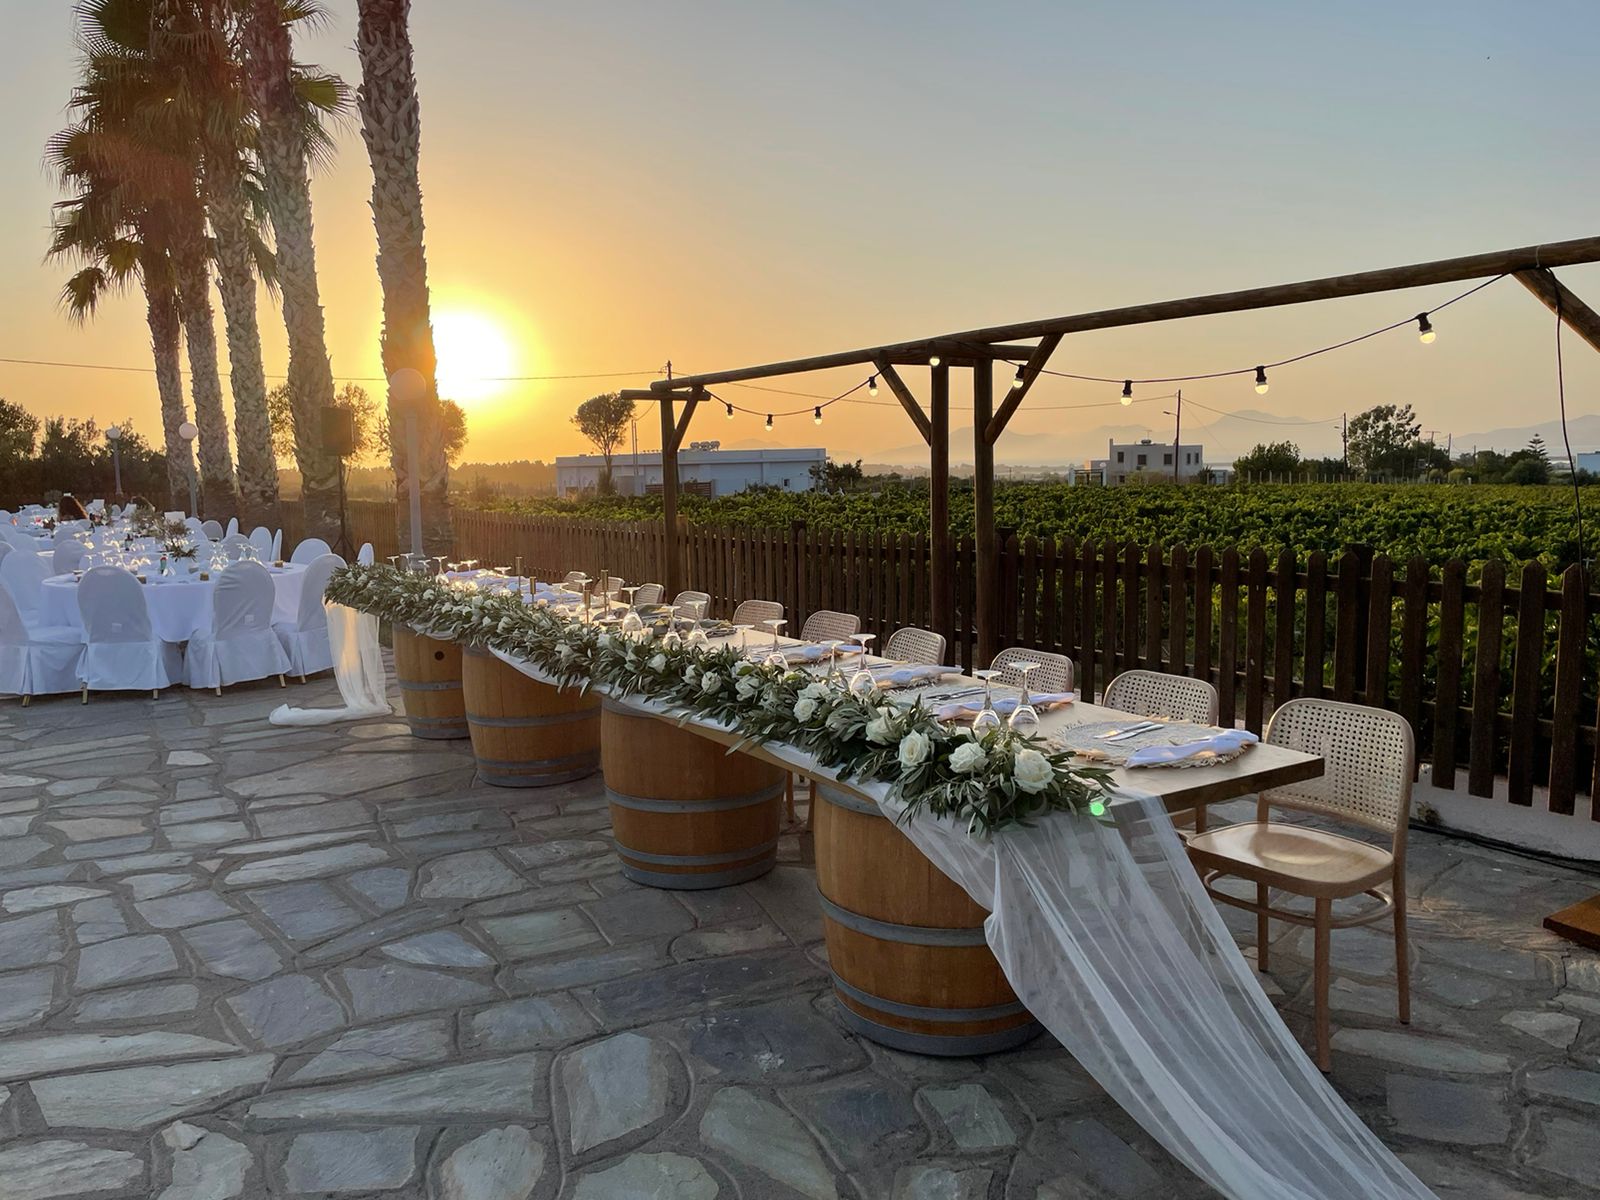 Book your wedding day in Ktima Akrani - Triantafyllopoulos Winery